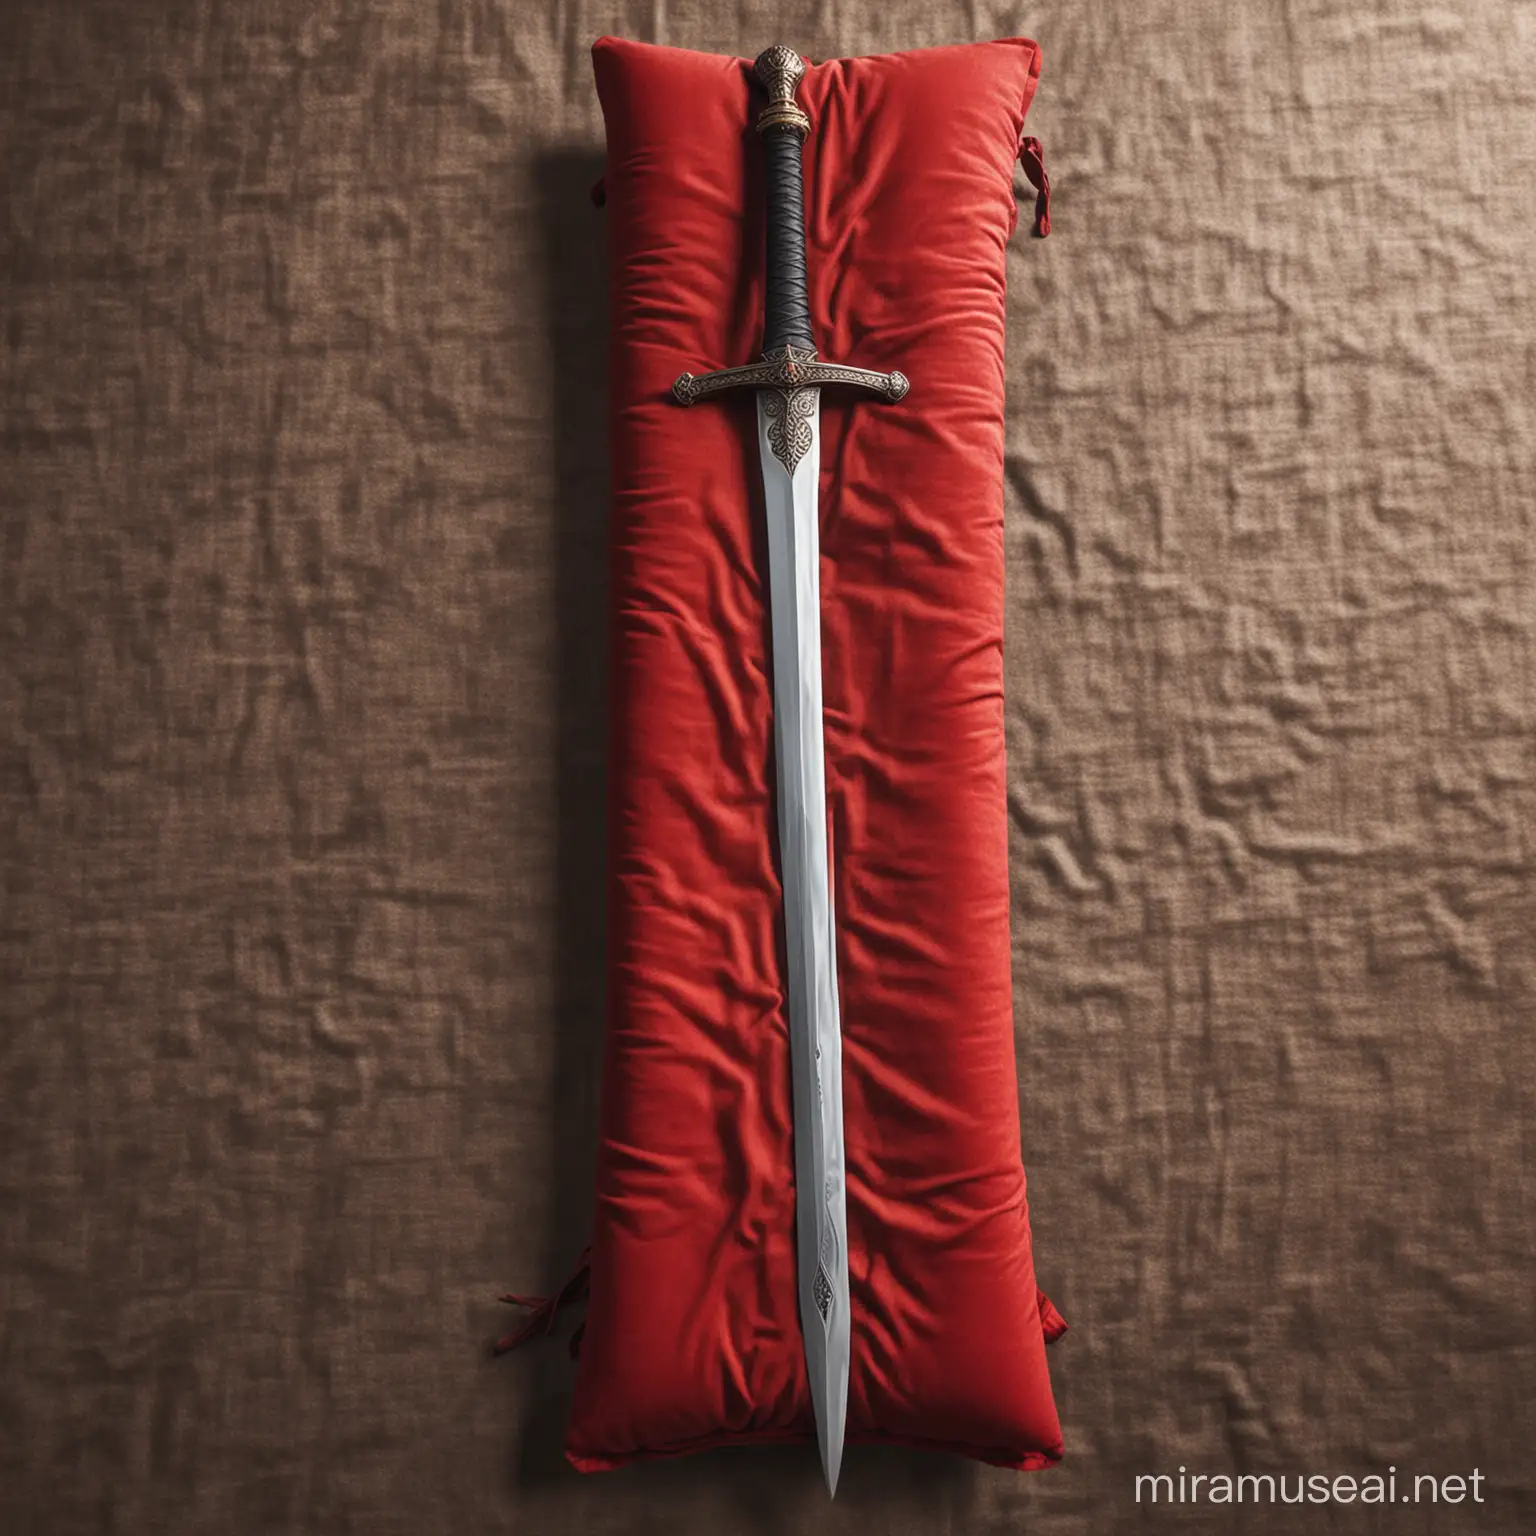 A long great sword laying on a red cushin